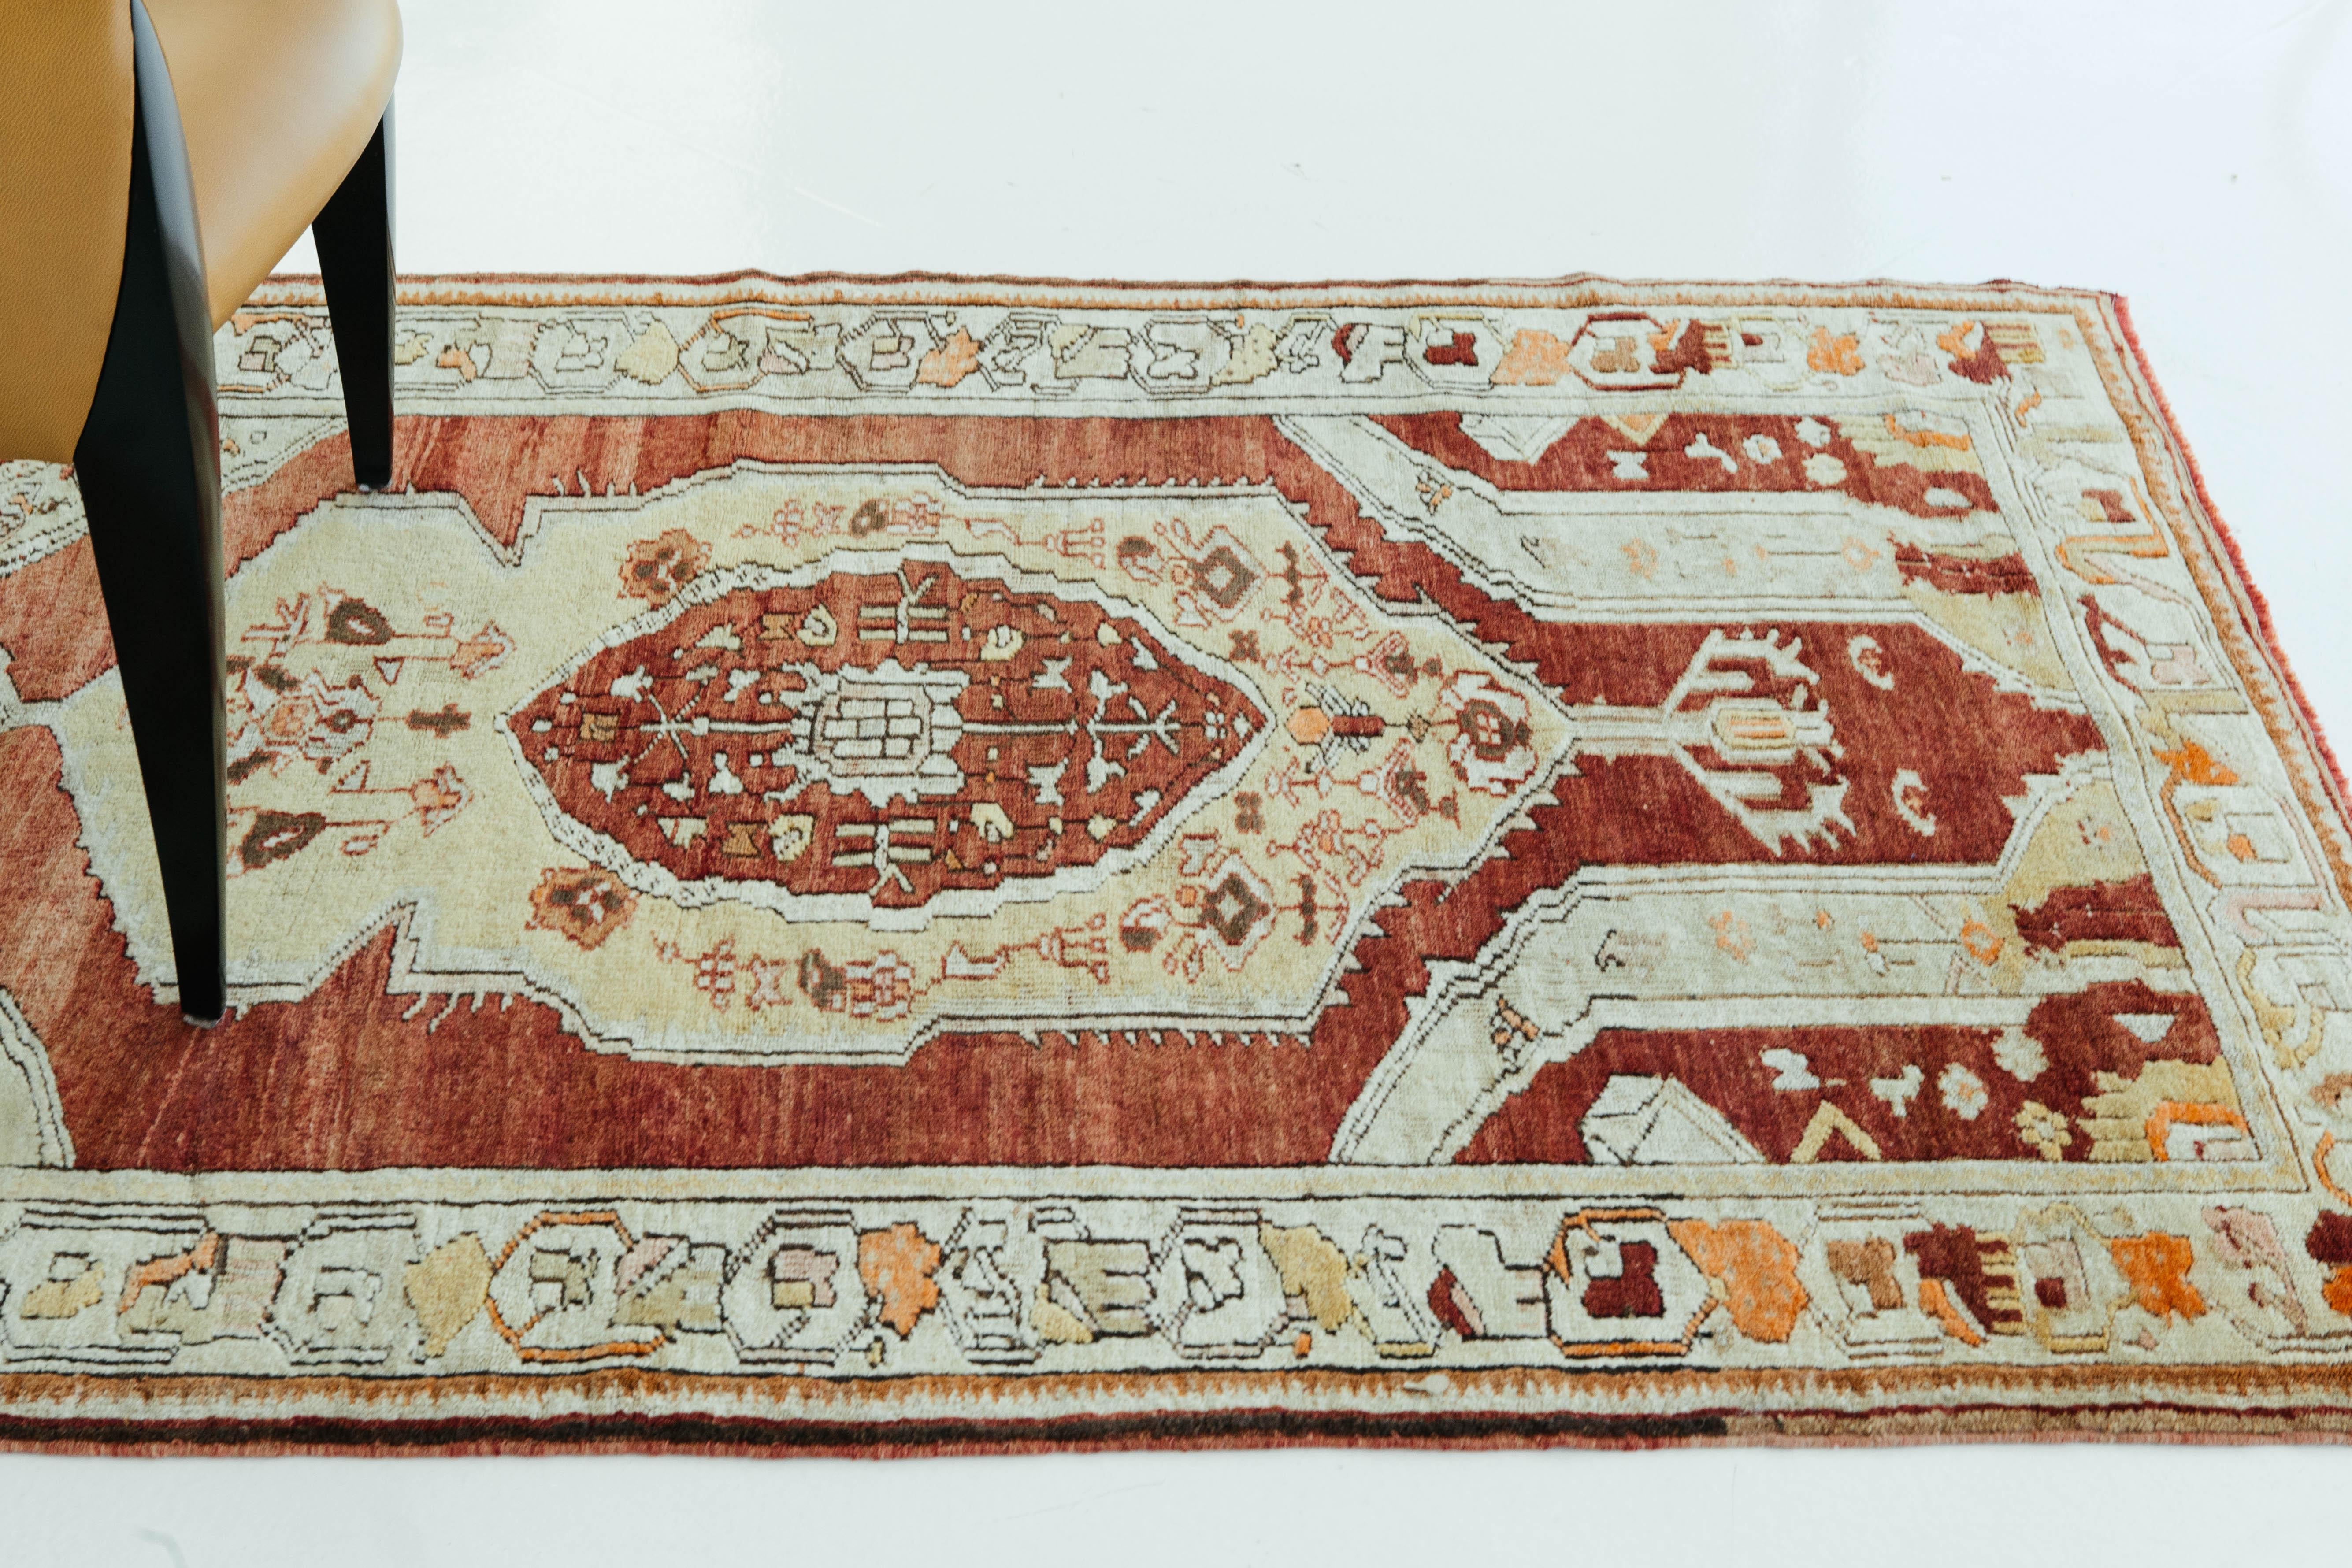 Ruby red, golden yellow, and ivory work cohesively to bring out this Turkish Anatolian rug's elegance. This piece showcases traditional Anatolian designs including the central medallion and the geometric and symmetric patterning of floral motifs.